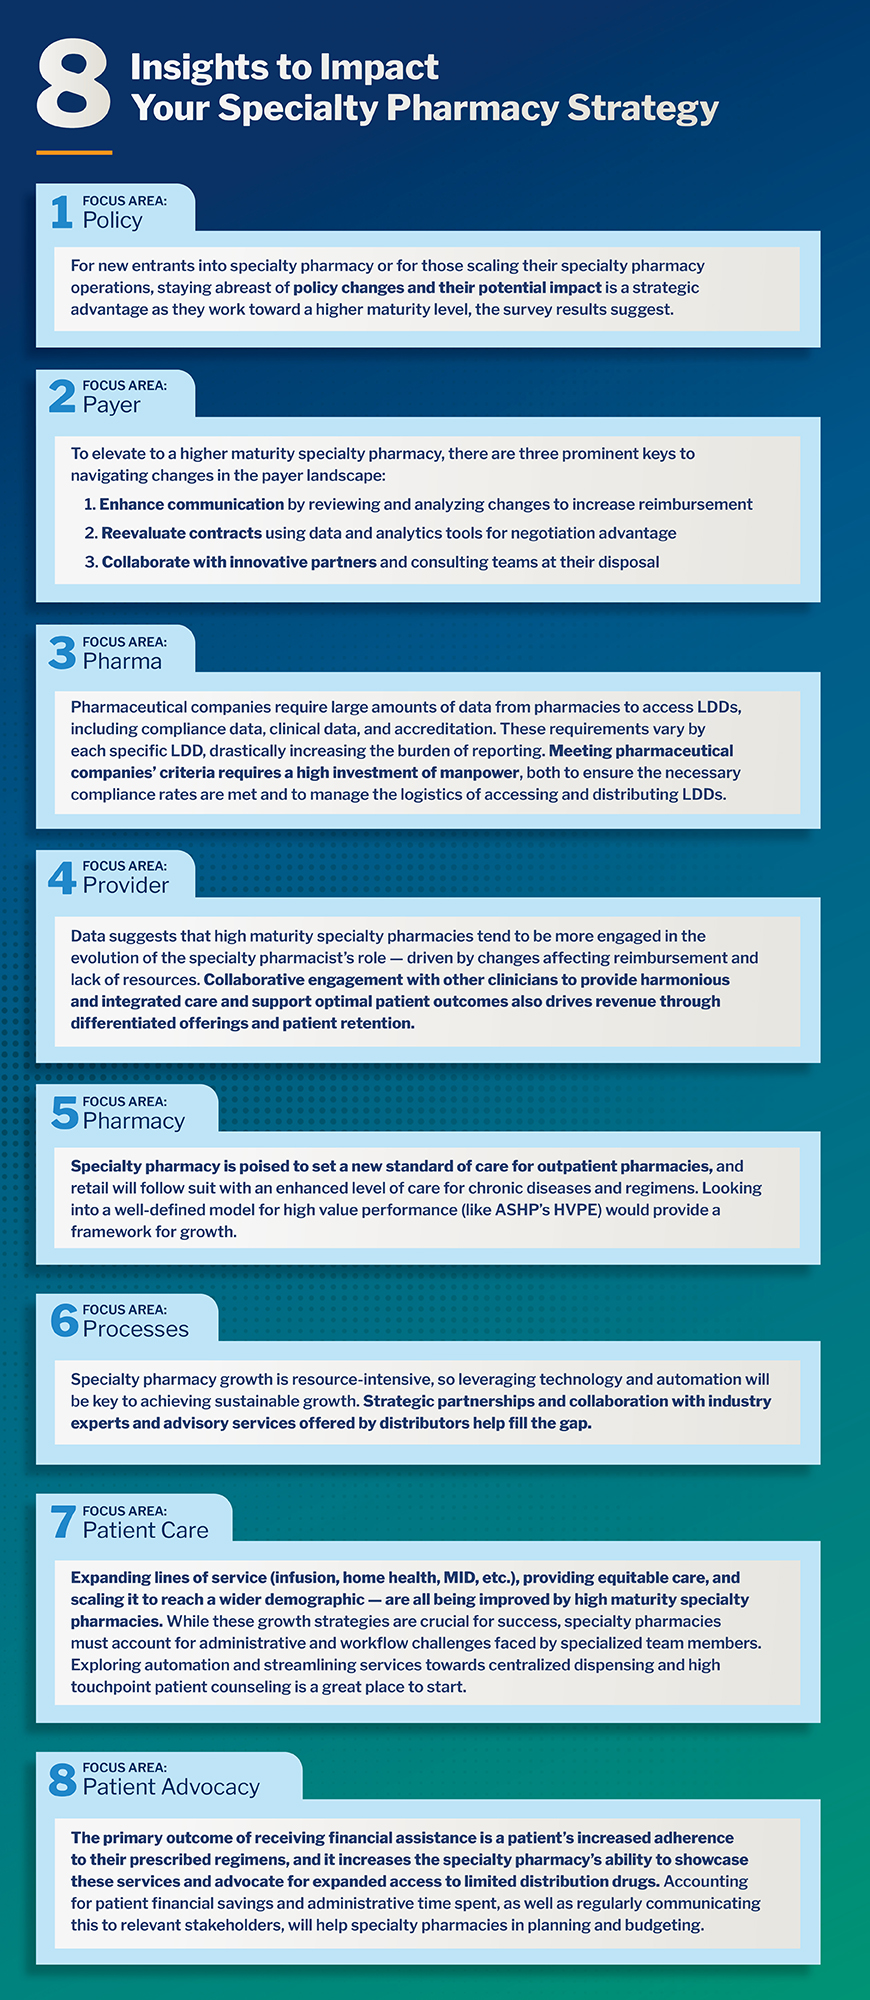 8 Insights to Impact Your Specialty Pharmacy Strategy Infographic